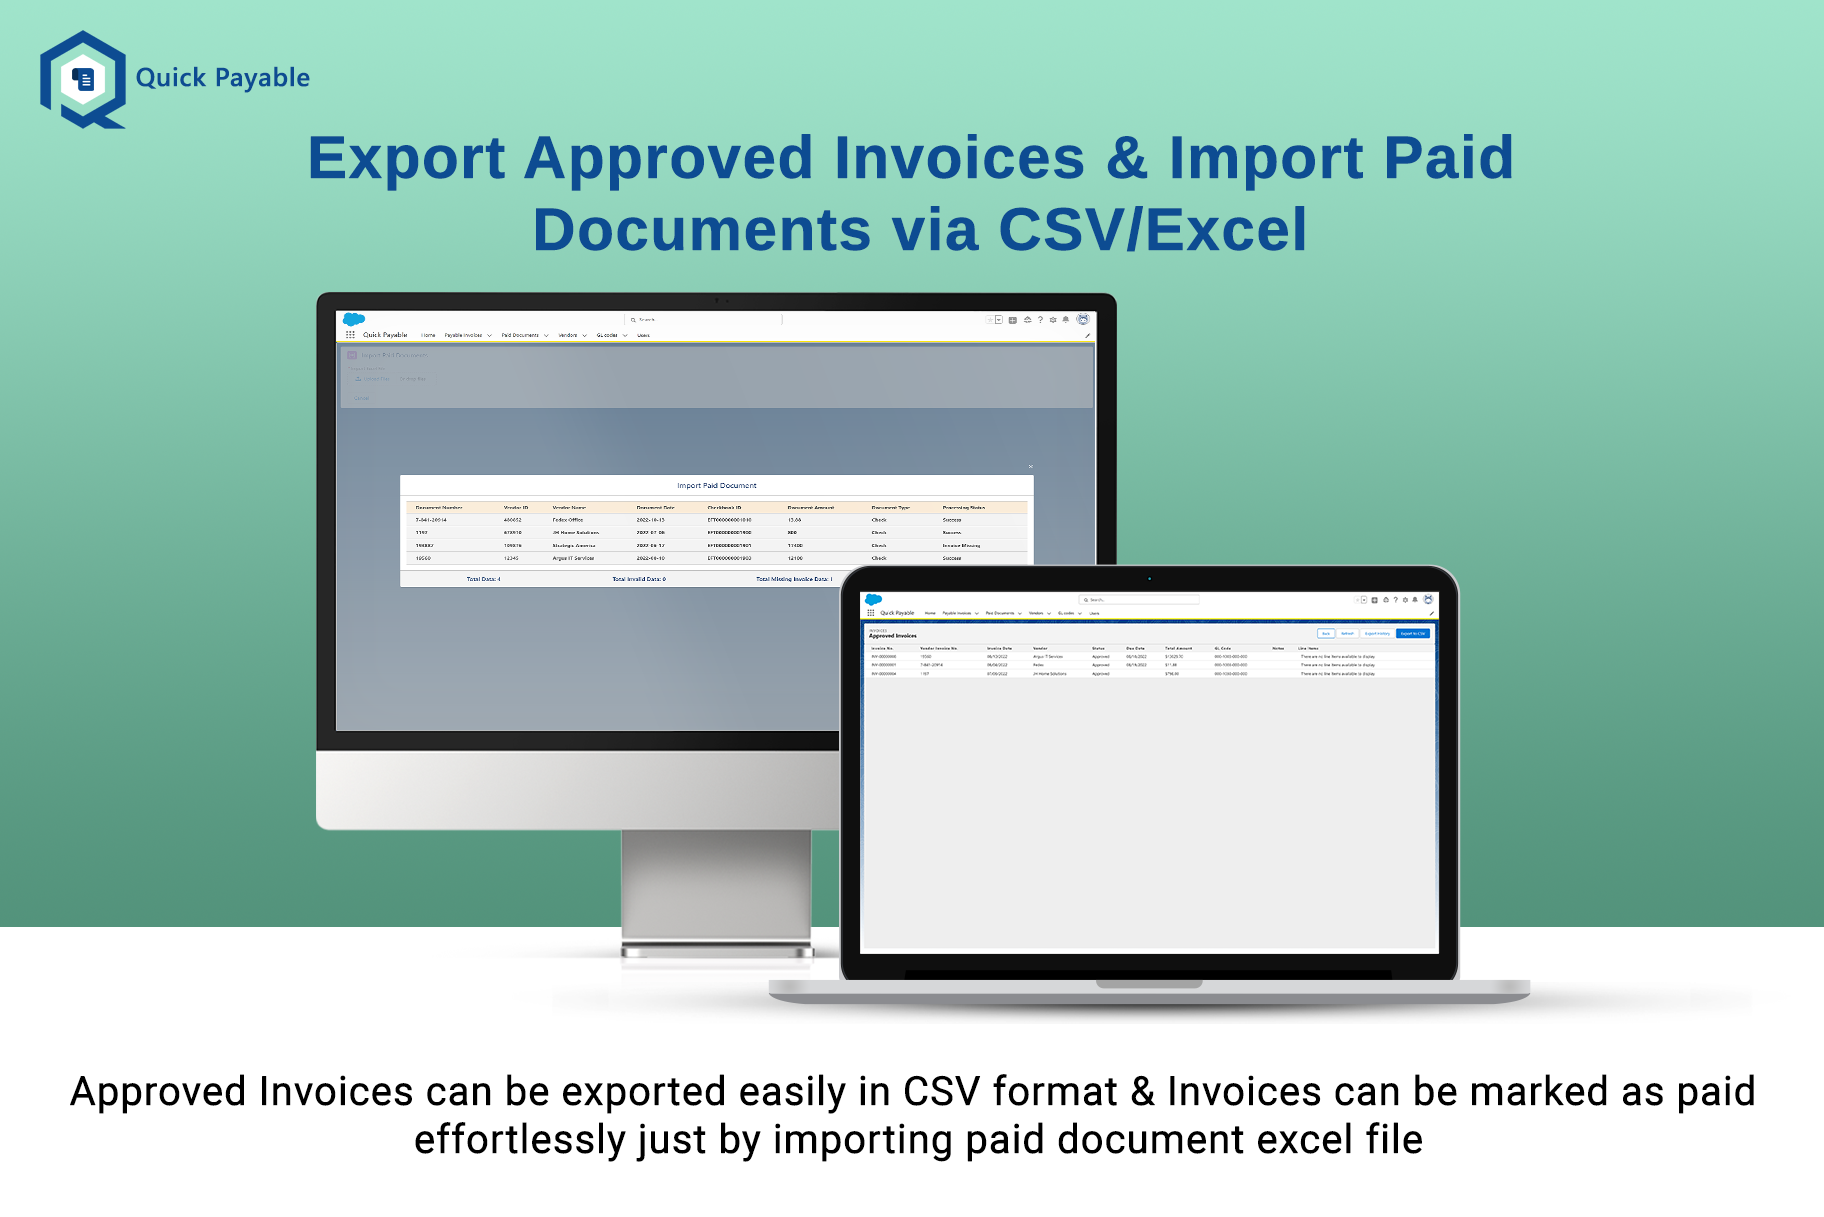 Export Approved Invoices & Import Paid Documents via CSV/Excel